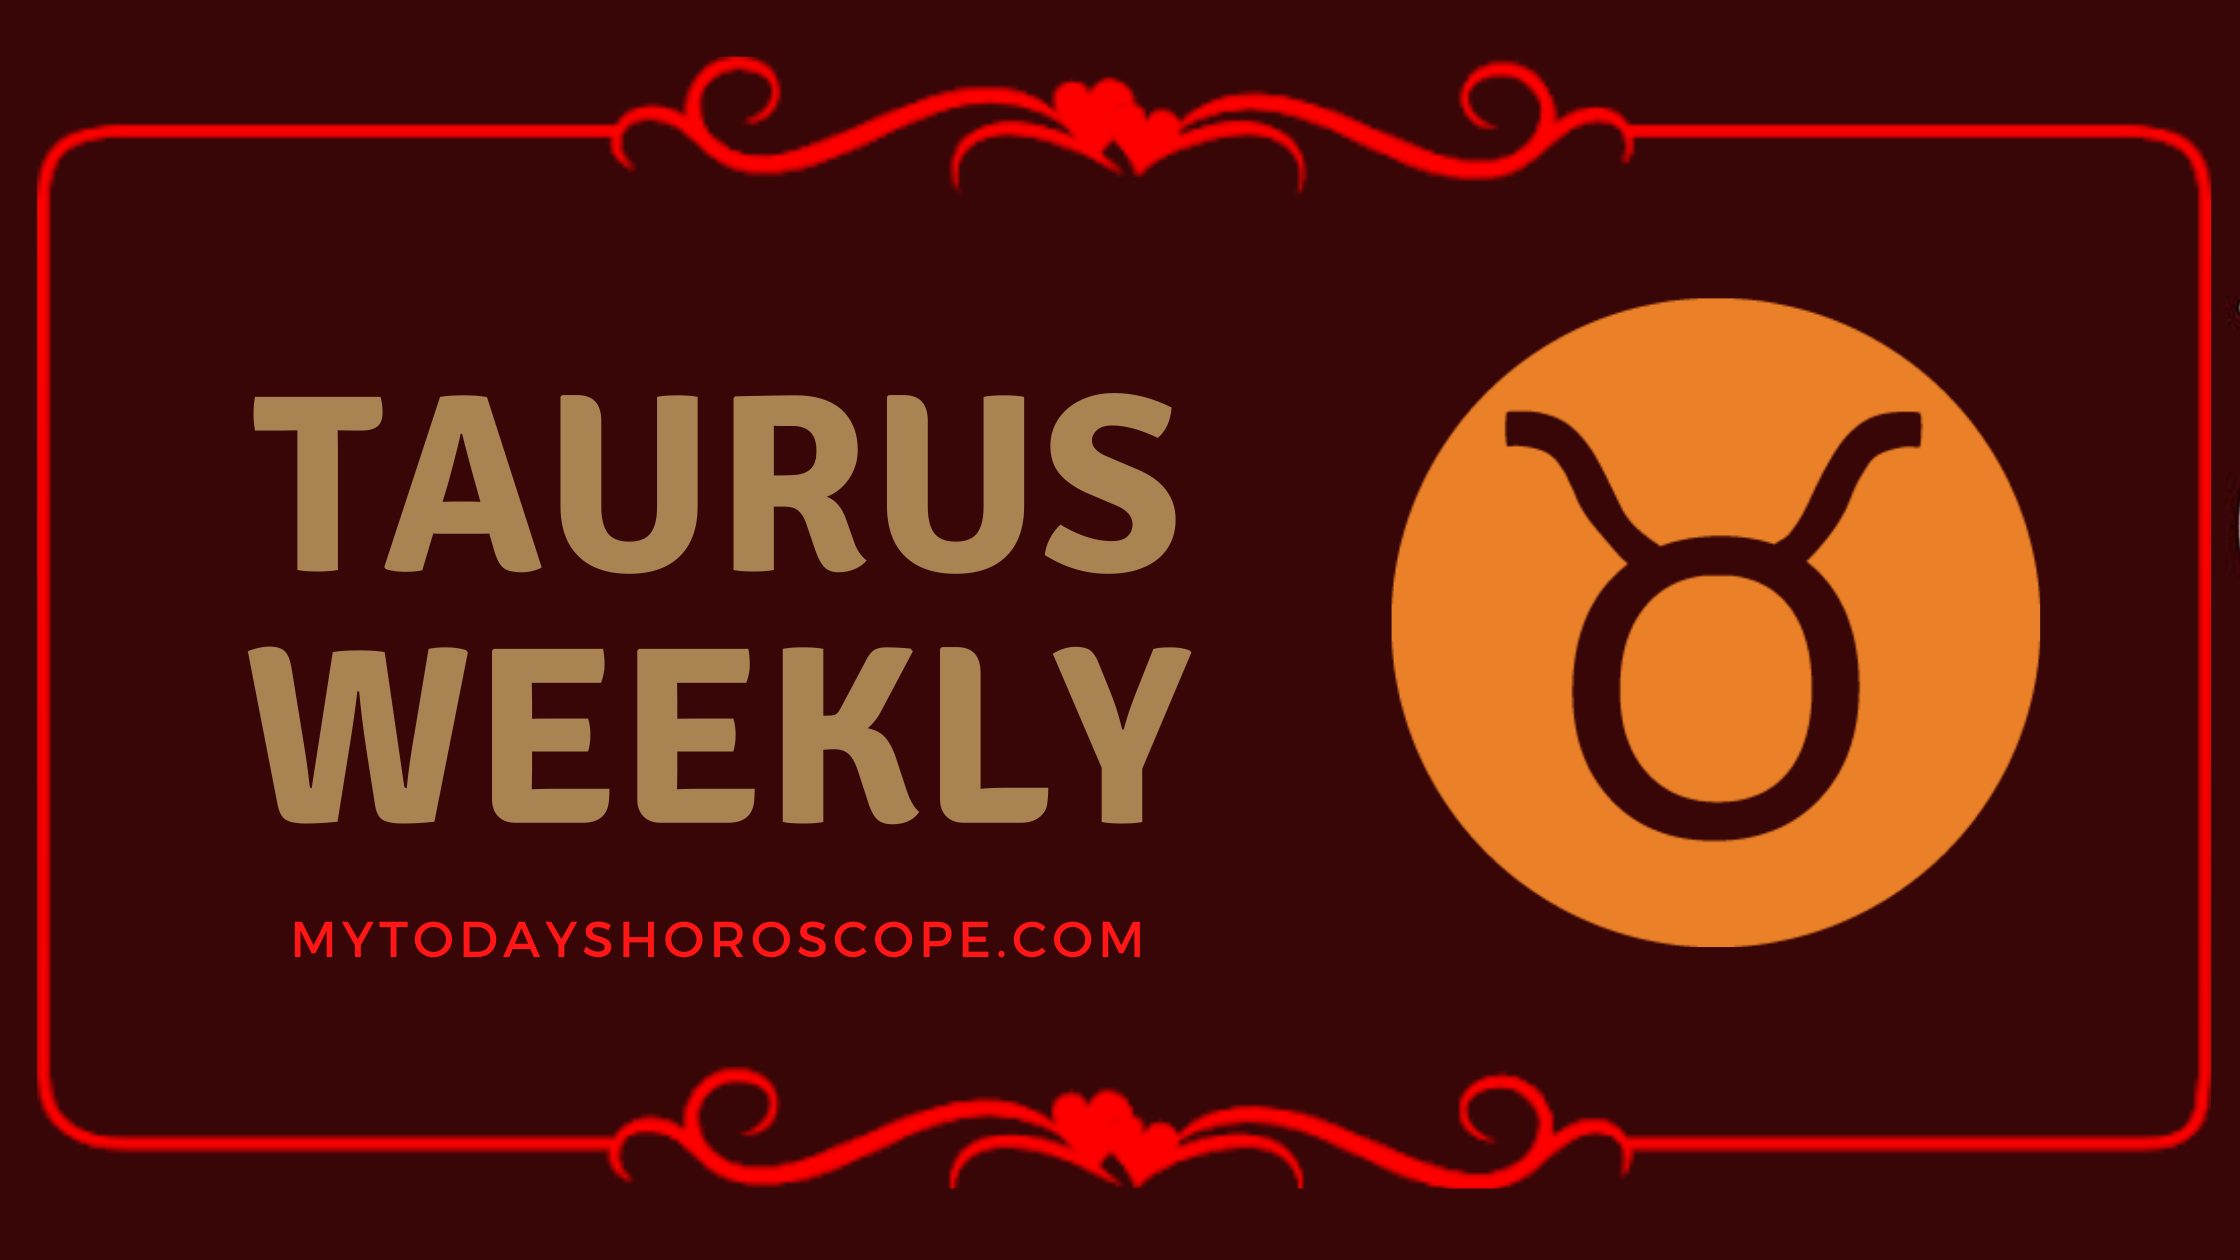 Taurus Weekly Horoscope for Love, Work and Well-being